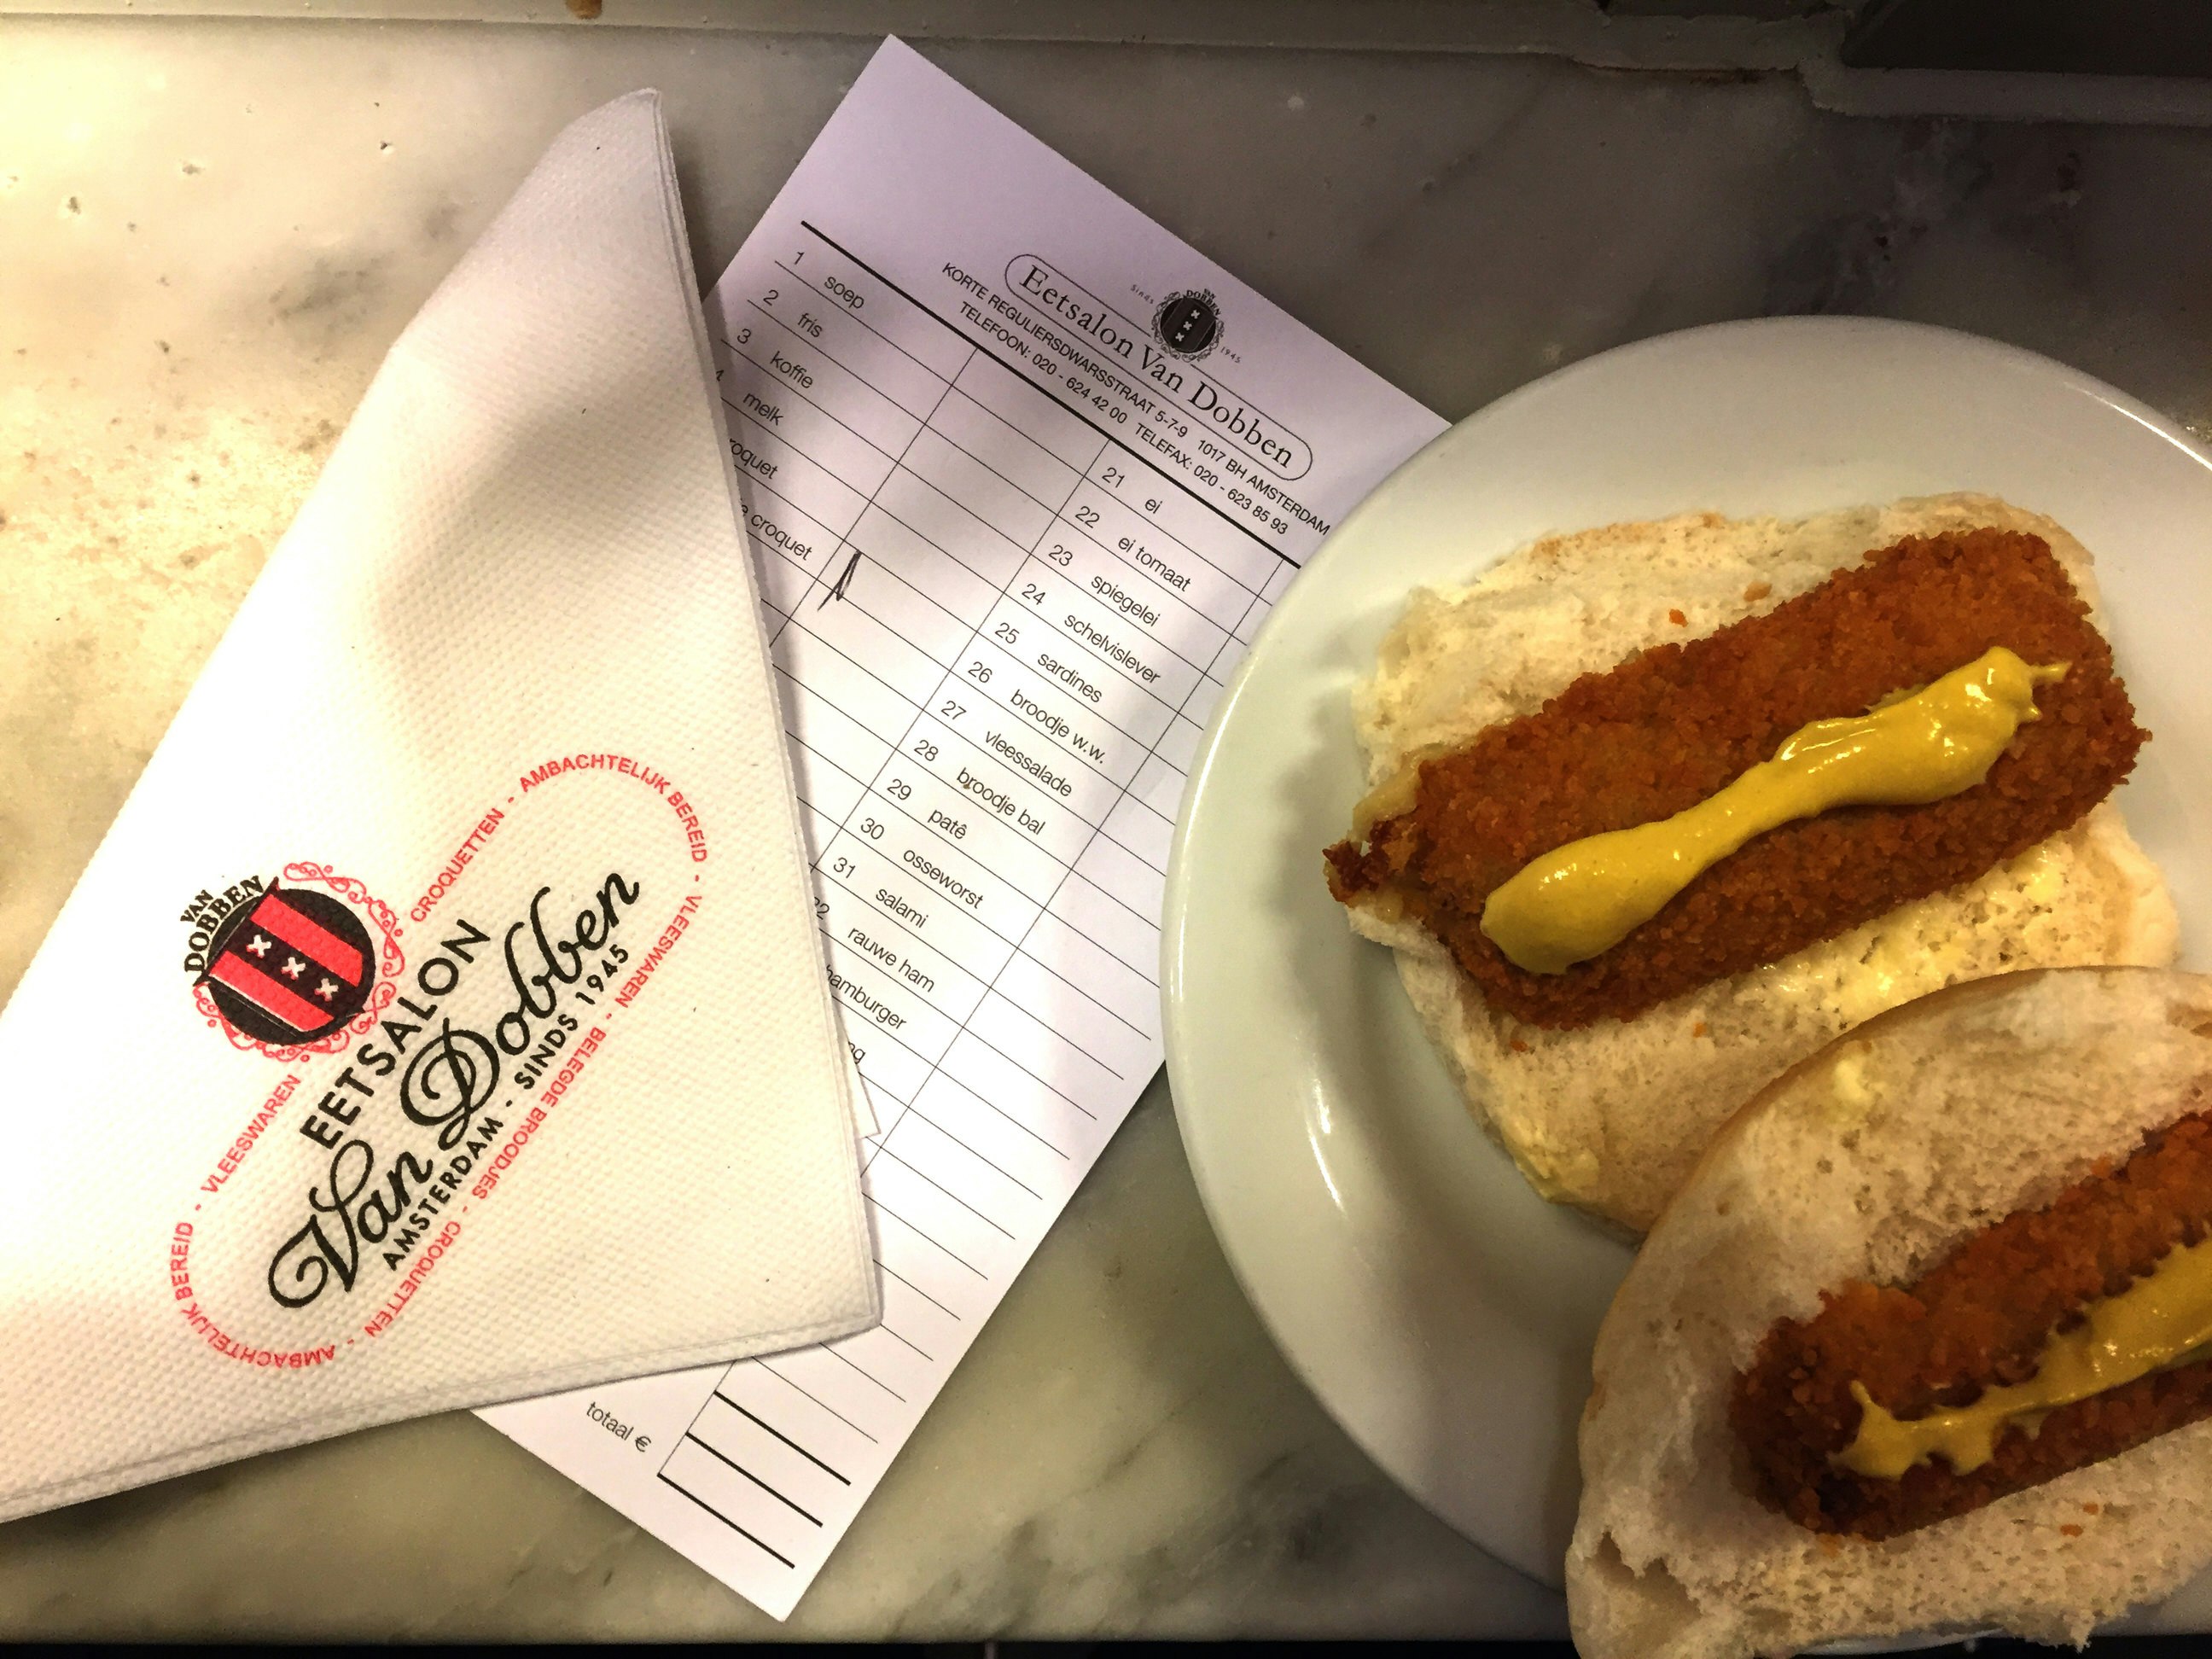 On the right is a bread roll split in half; each slice is topped with a kroket and a line of yellow-brown mustard. On the left is a napkin folded diagonally, displaying the name of the cafe (Eetsalon Van Dobben).